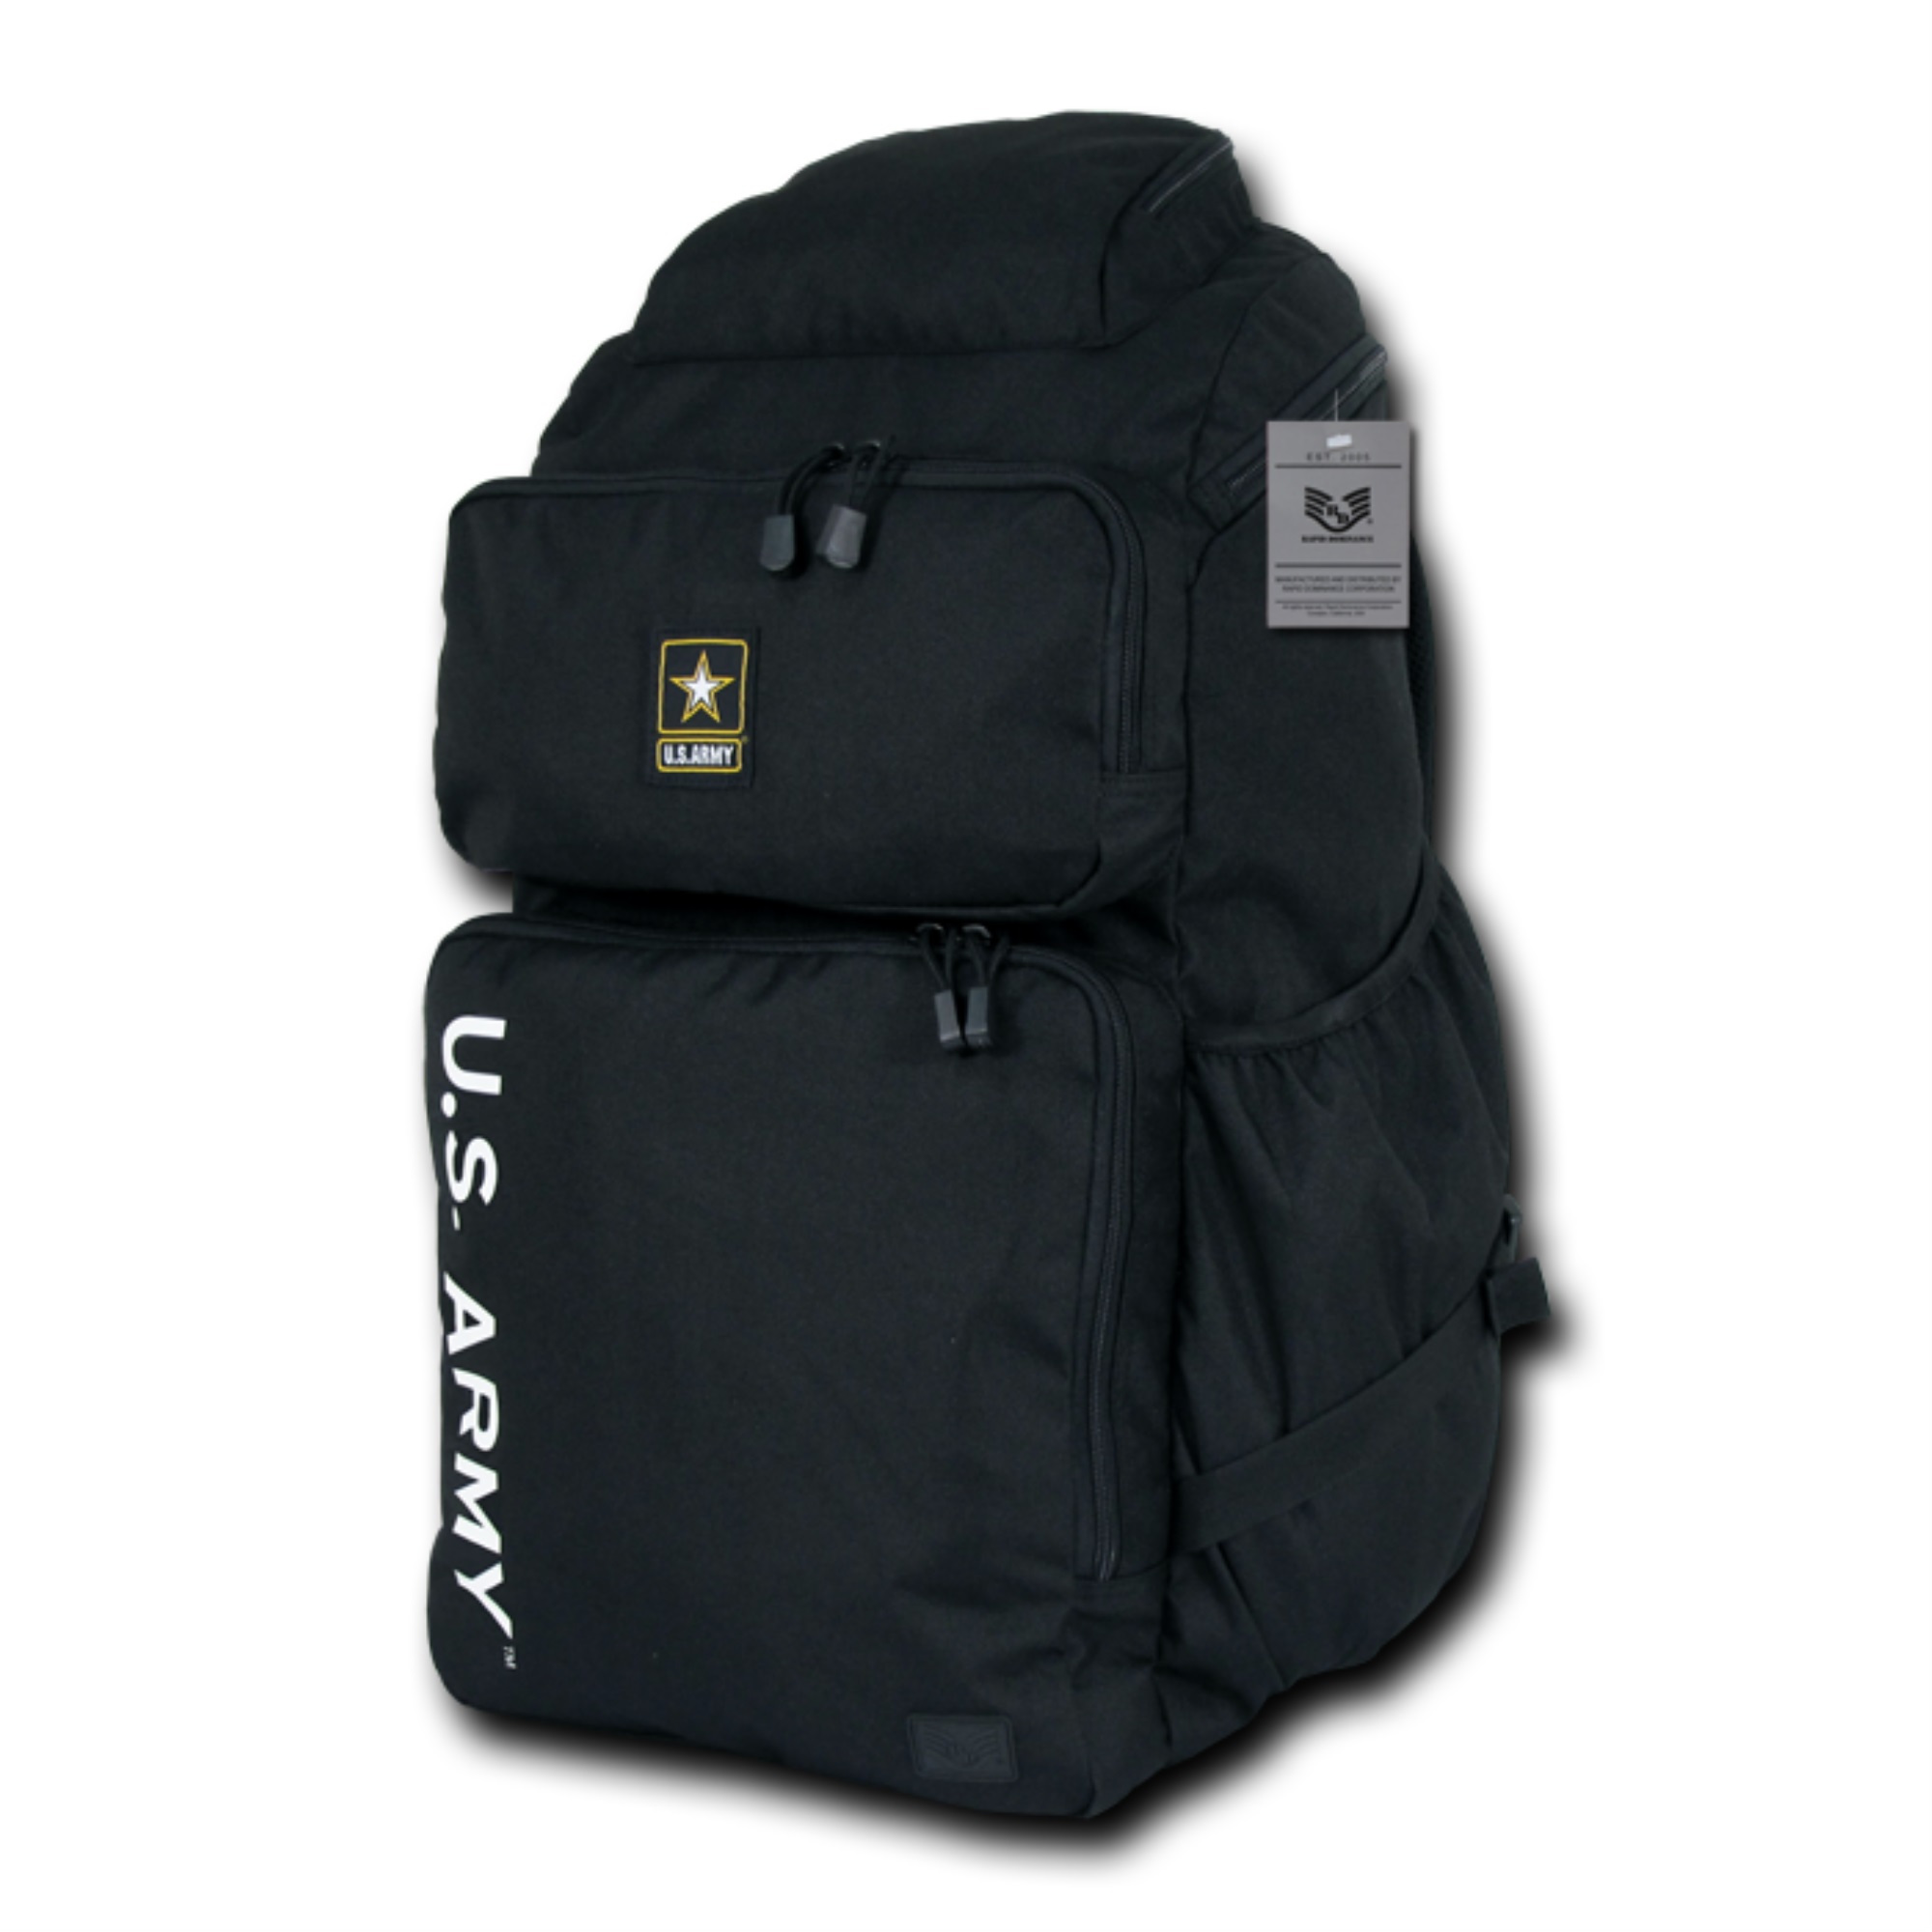 Top Load Backpack, Army, Black - image 1 of 3